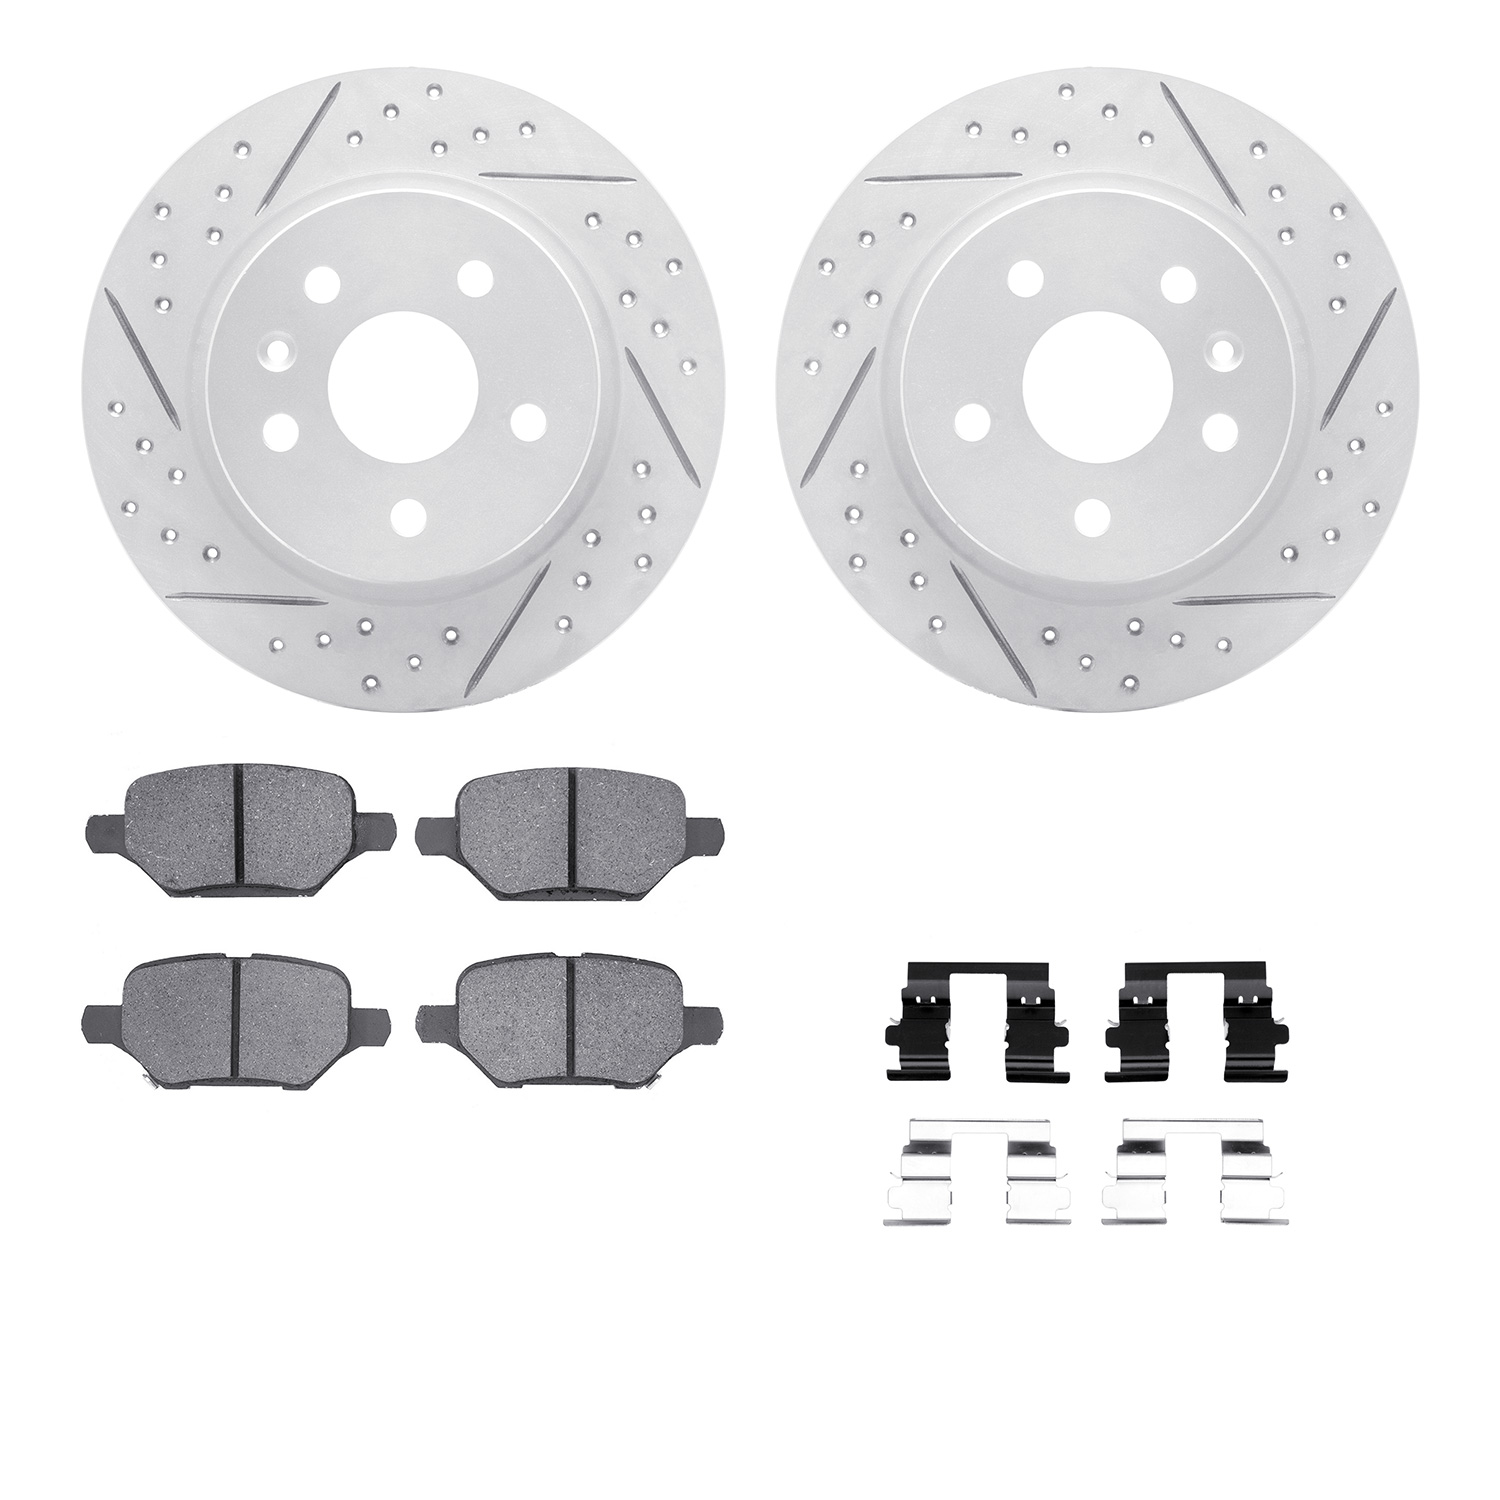 2512-45018 Geoperformance Drilled/Slotted Rotors w/5000 Advanced Brake Pads Kit & Hardware, Fits Select GM, Position: Rear